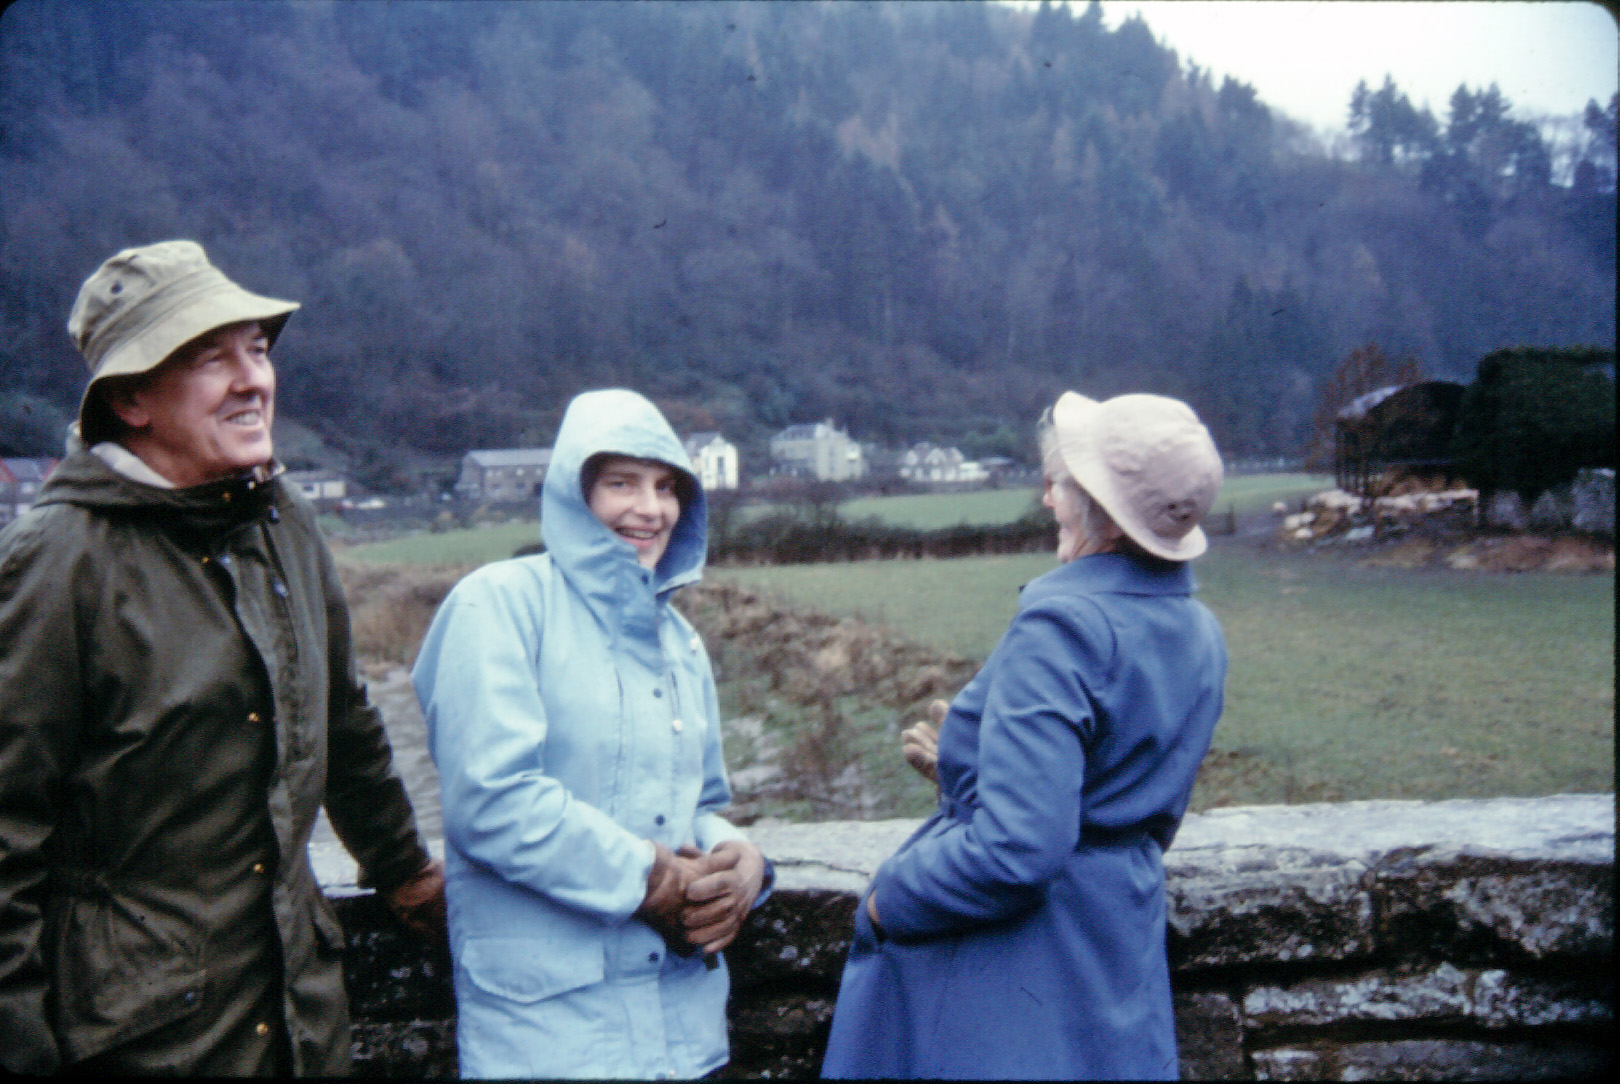 A group of 3 middle-aged people on a wet day in the French countryside